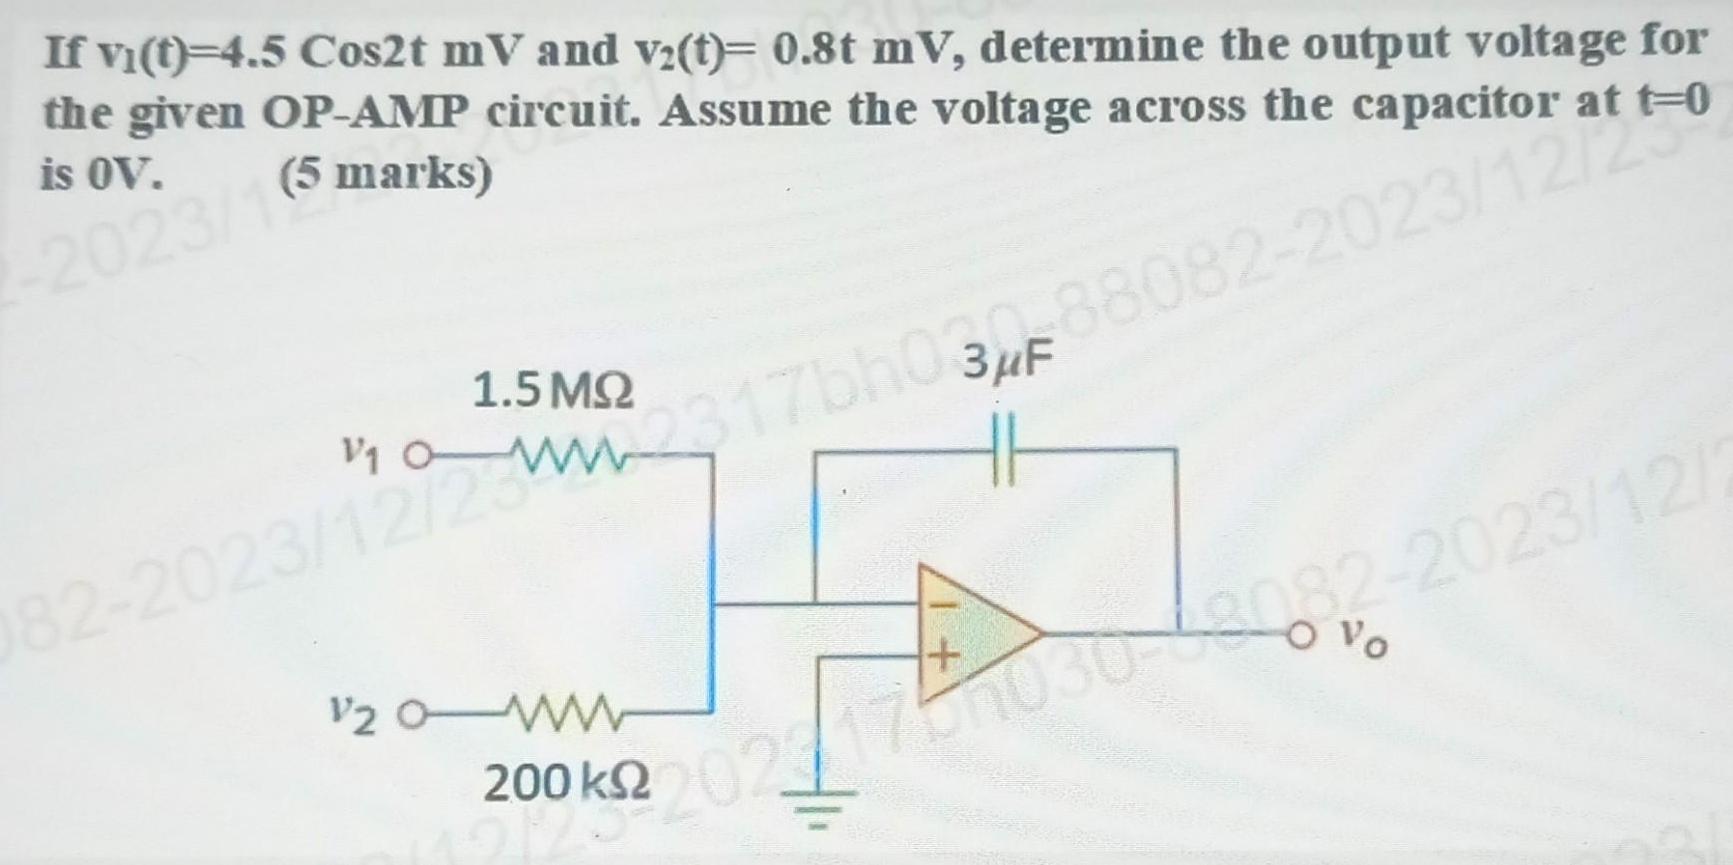 If vi(t)=4.5 Cos2t mV and v2(t)= 0.8t mV, determine the output voltage for the given OP-AMP circuit. Assume